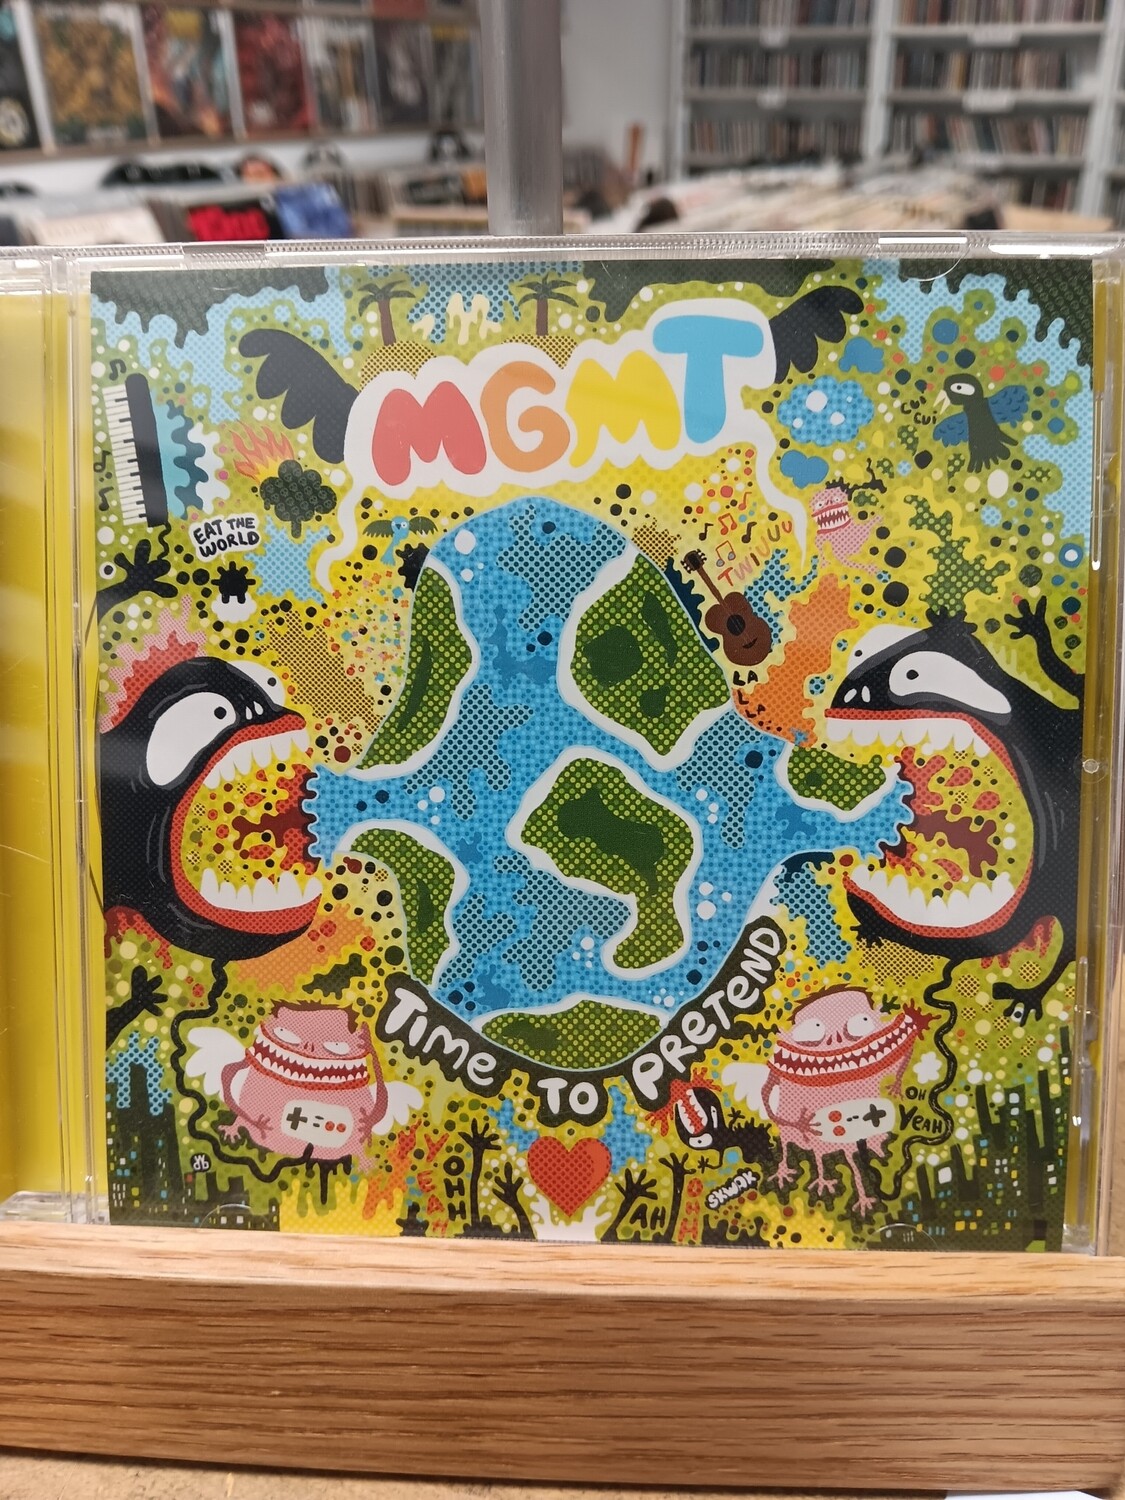 MGMT - Time to pretend (CD)